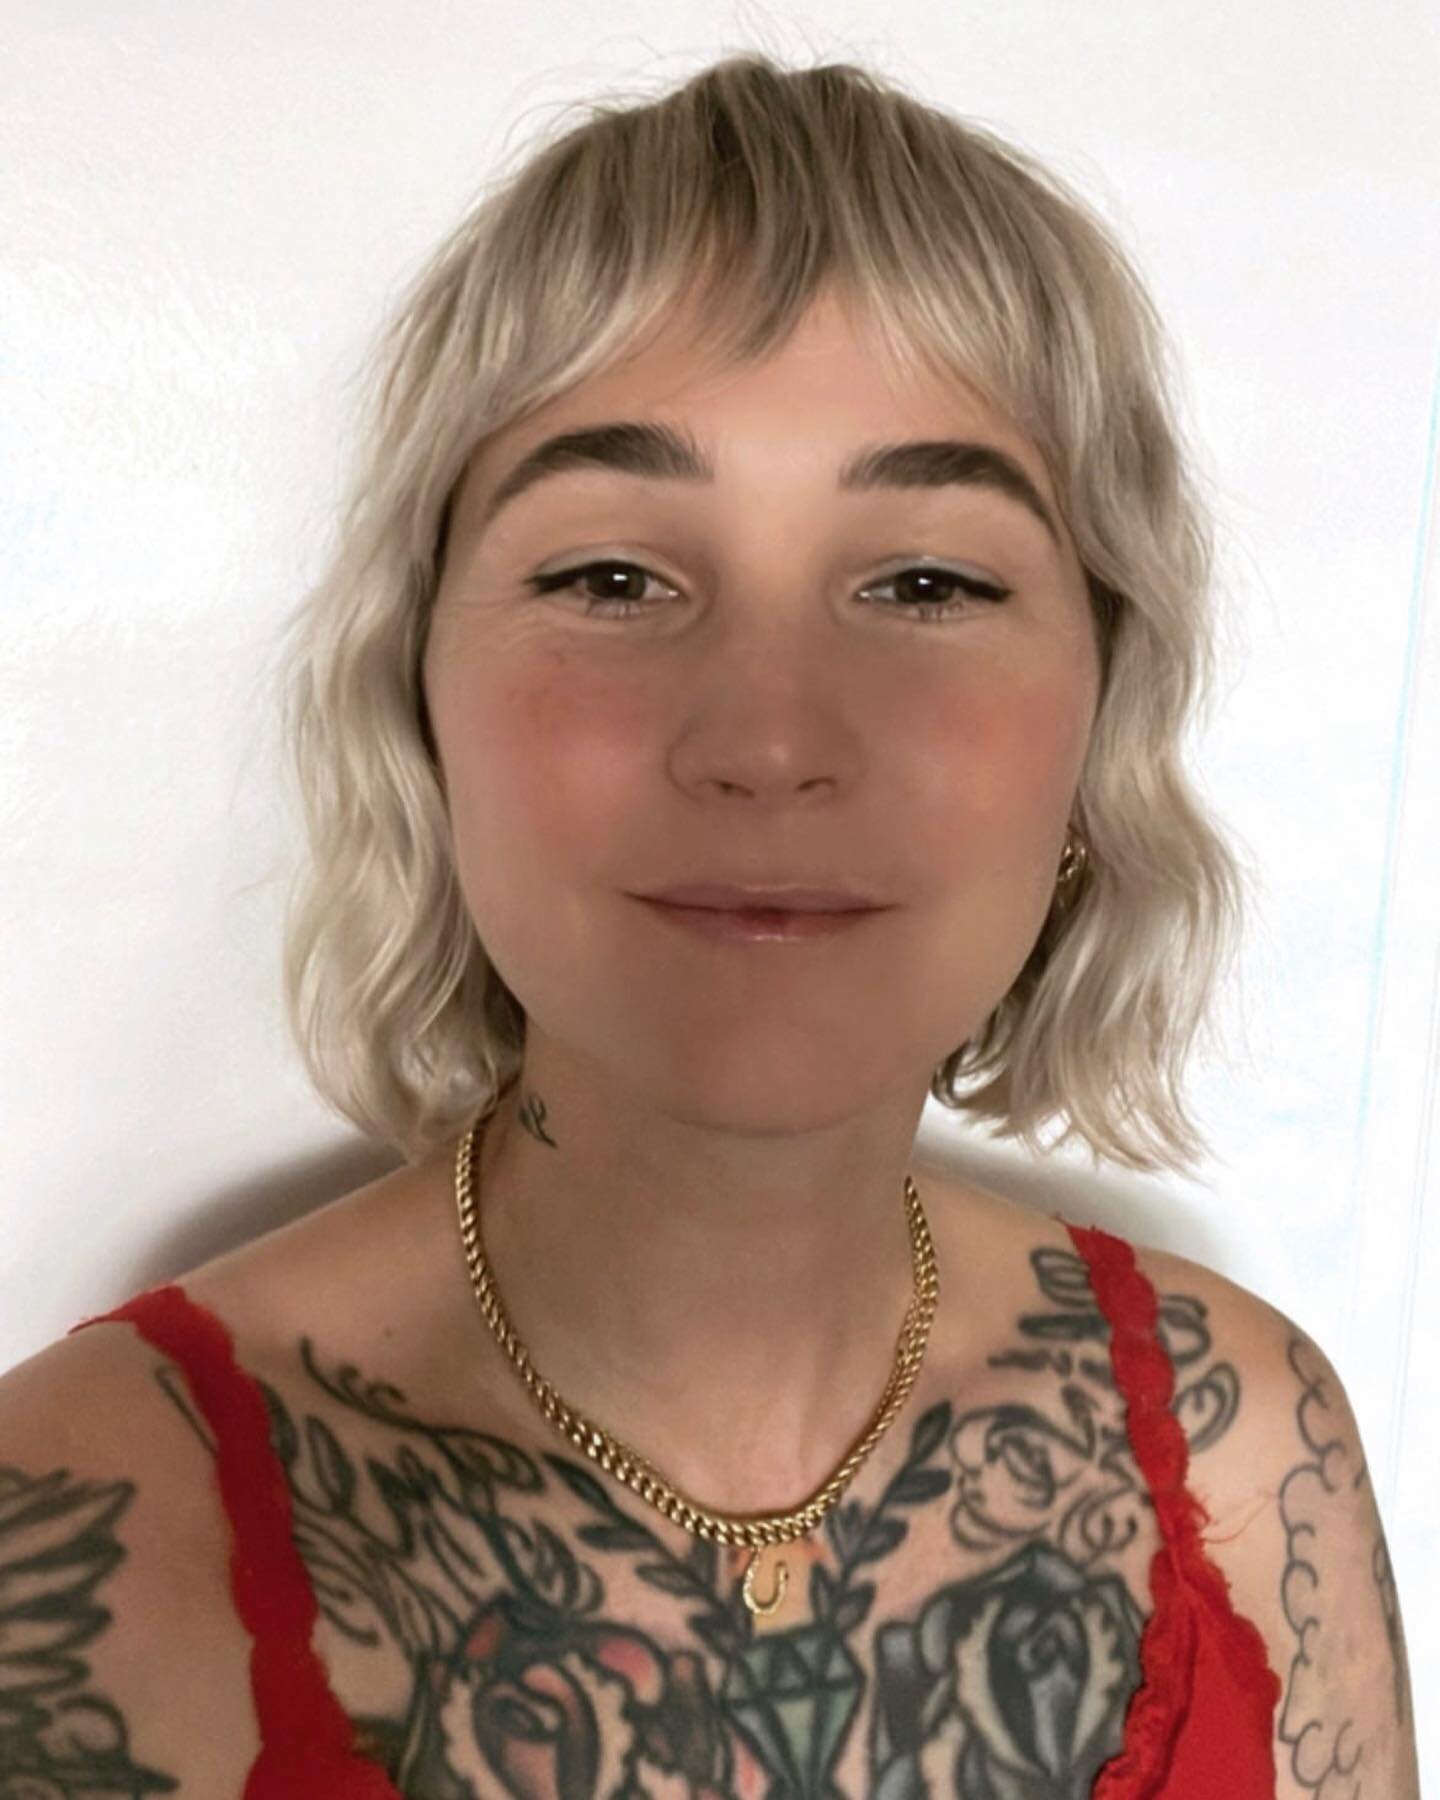 Turned Schyler&rsquo;s mullet into the cutest shaggy Bob ❤️

Also Schyler designs the most beautiful jewelry @susumi.studio and works out of @108.us in Silverlake for all yr piercing needs!